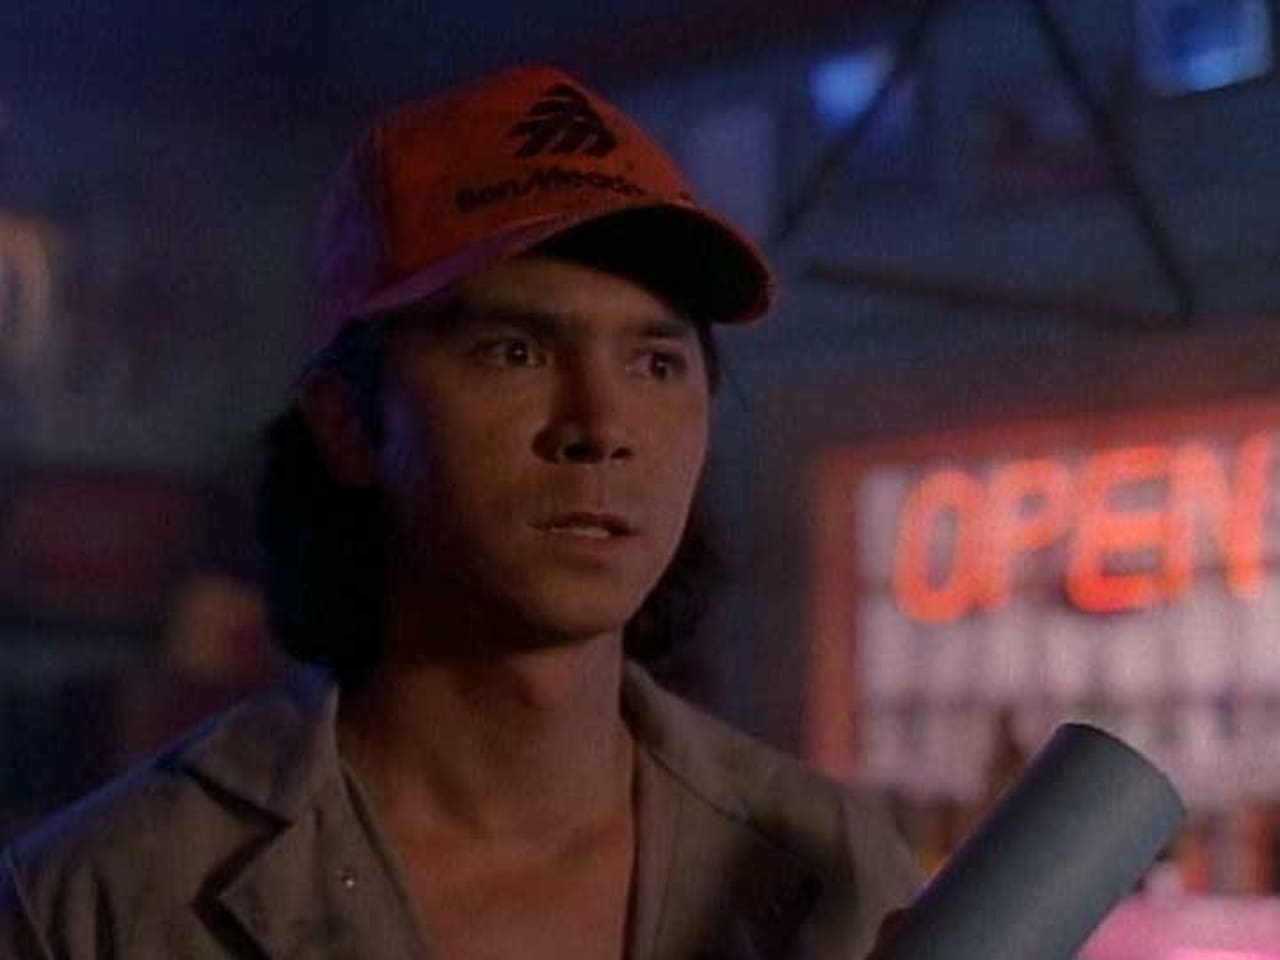 Tales from the Crypt - Season 5 Episode 11 : Oil's Well That Ends Well